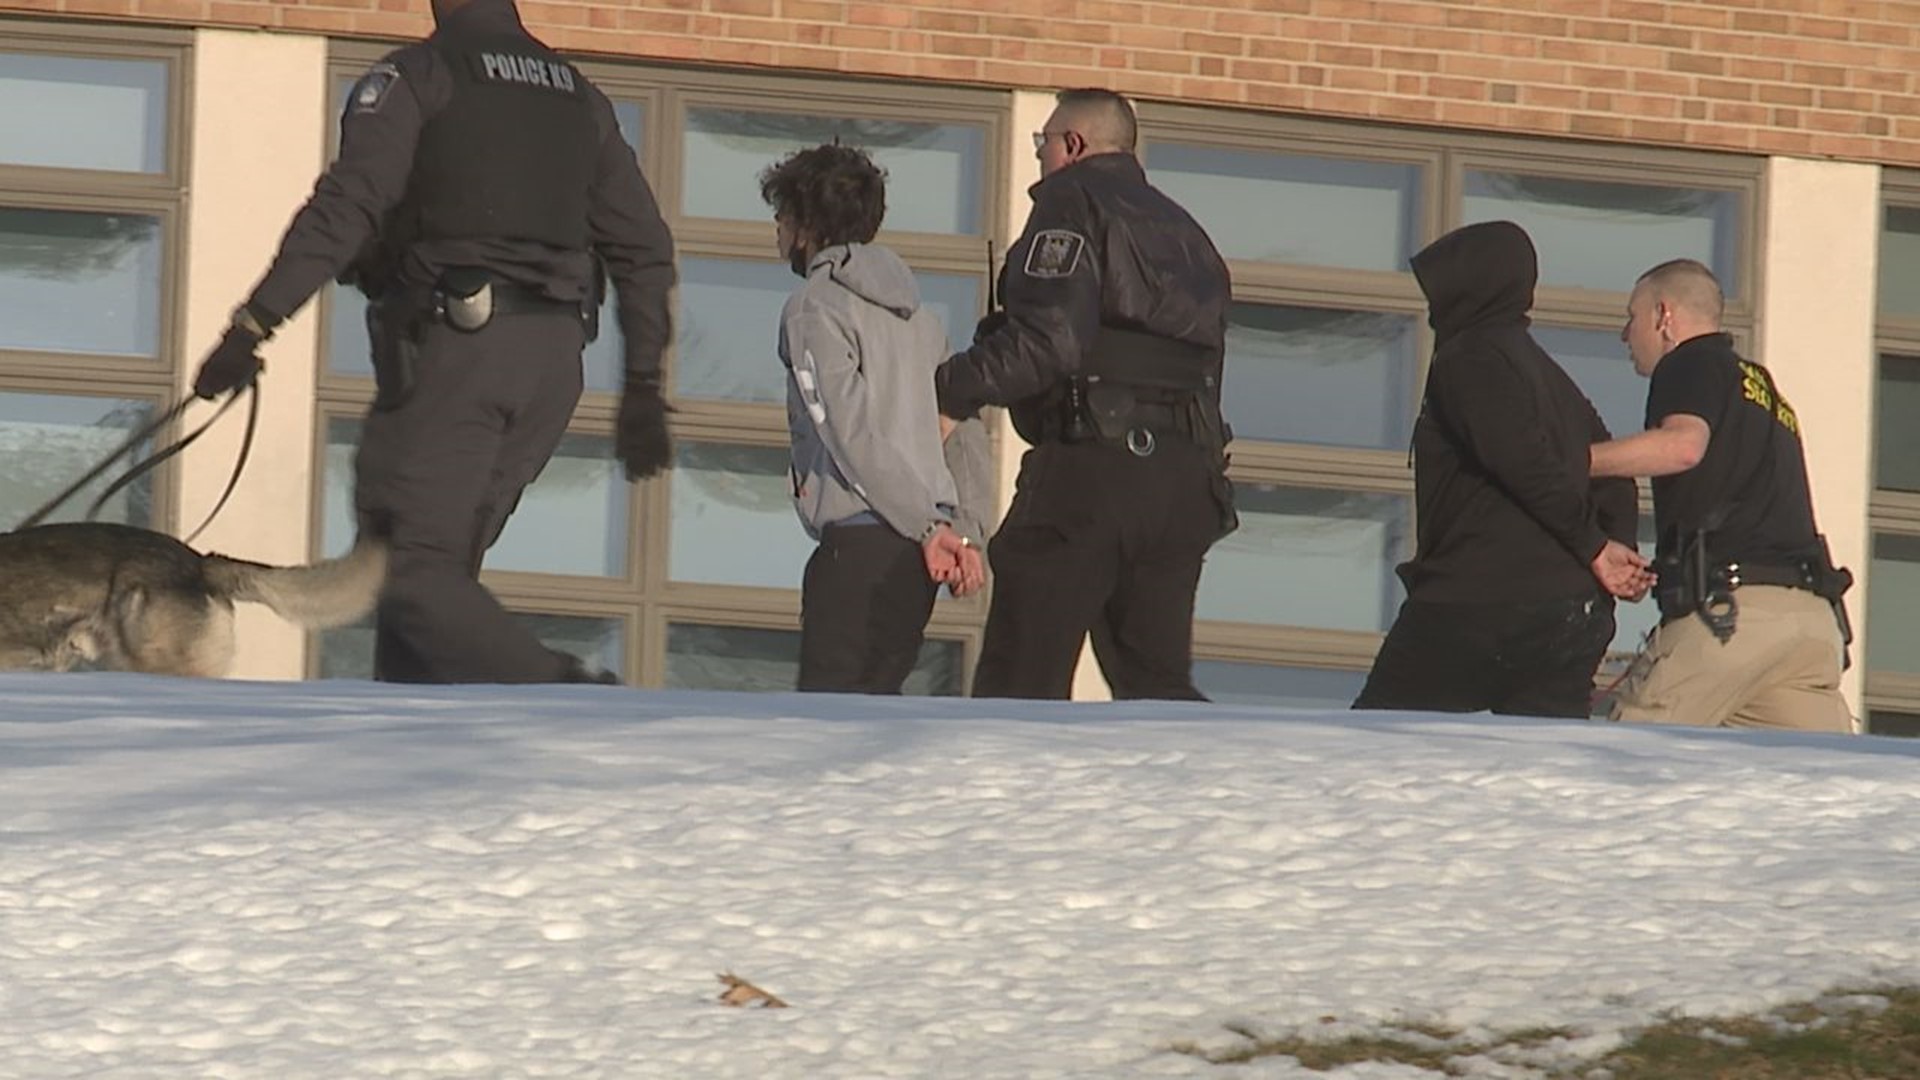 Students spent the day on lockdown while police searched for a handgun that was brought into the building.